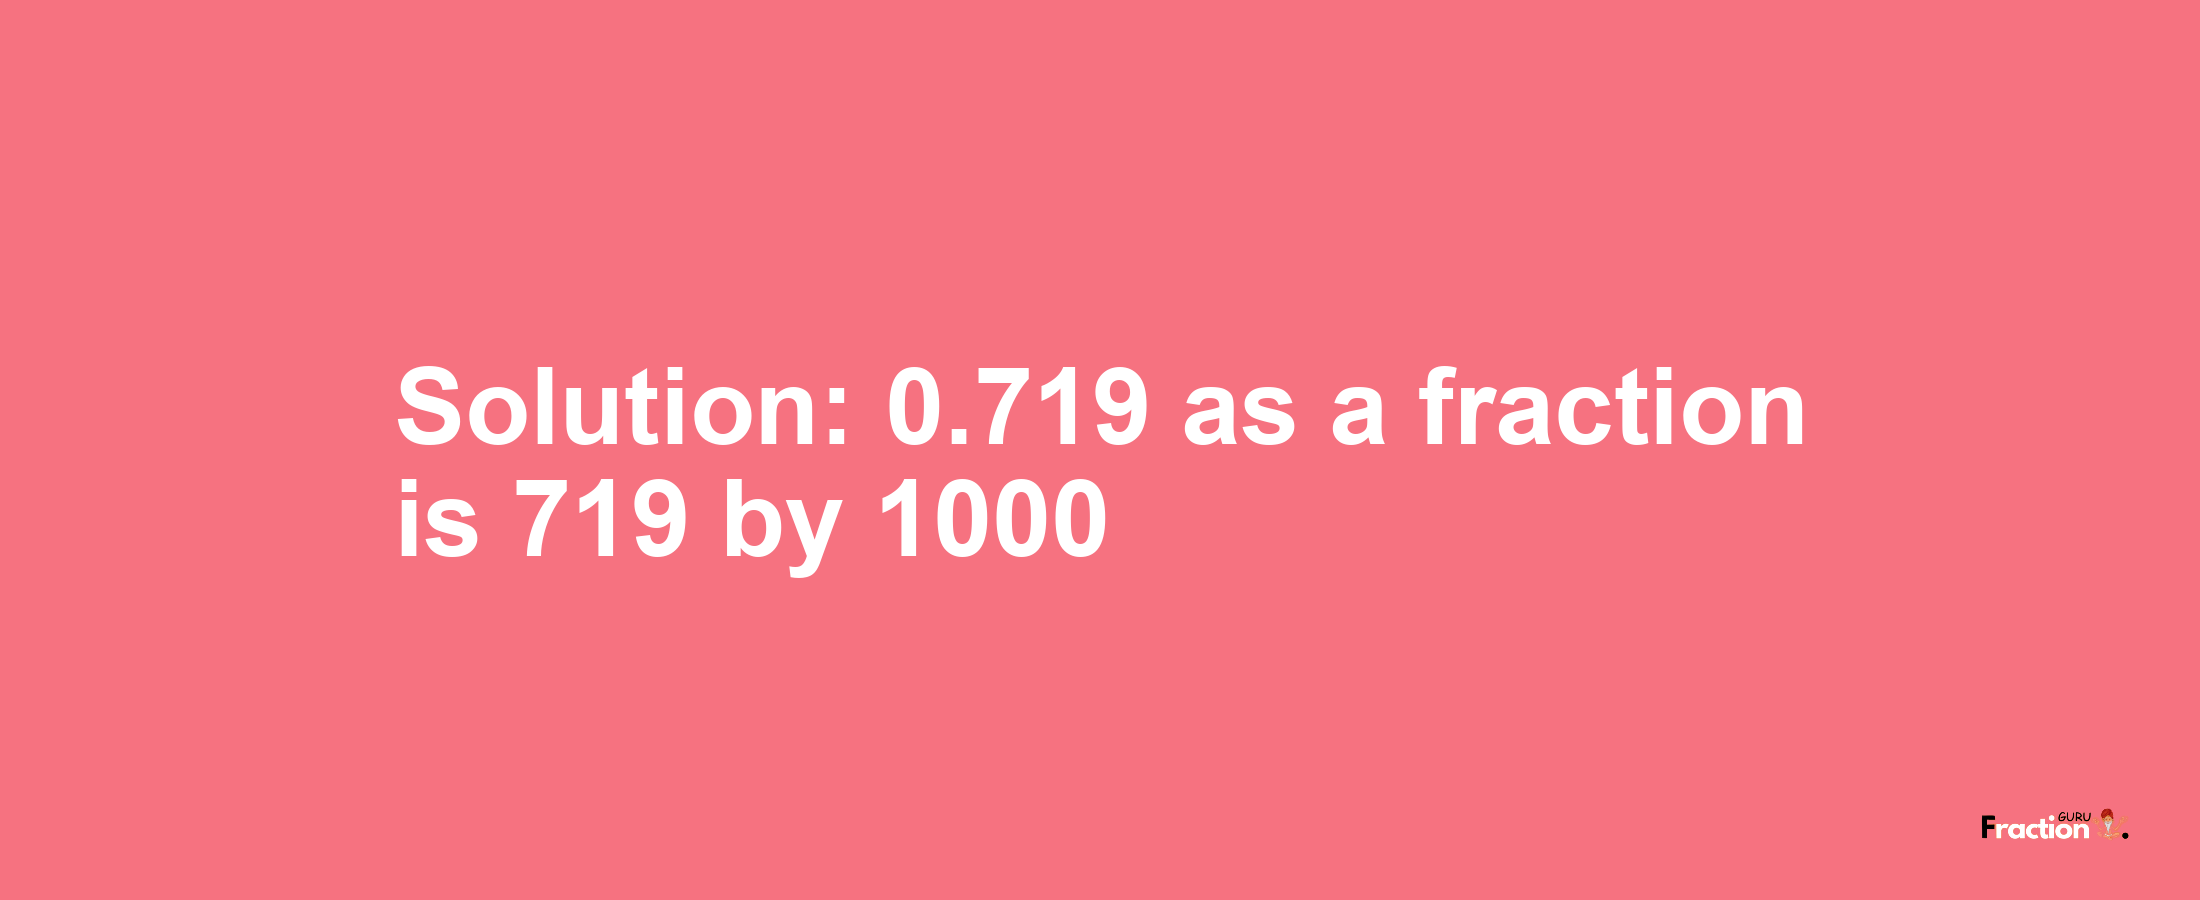 Solution:0.719 as a fraction is 719/1000